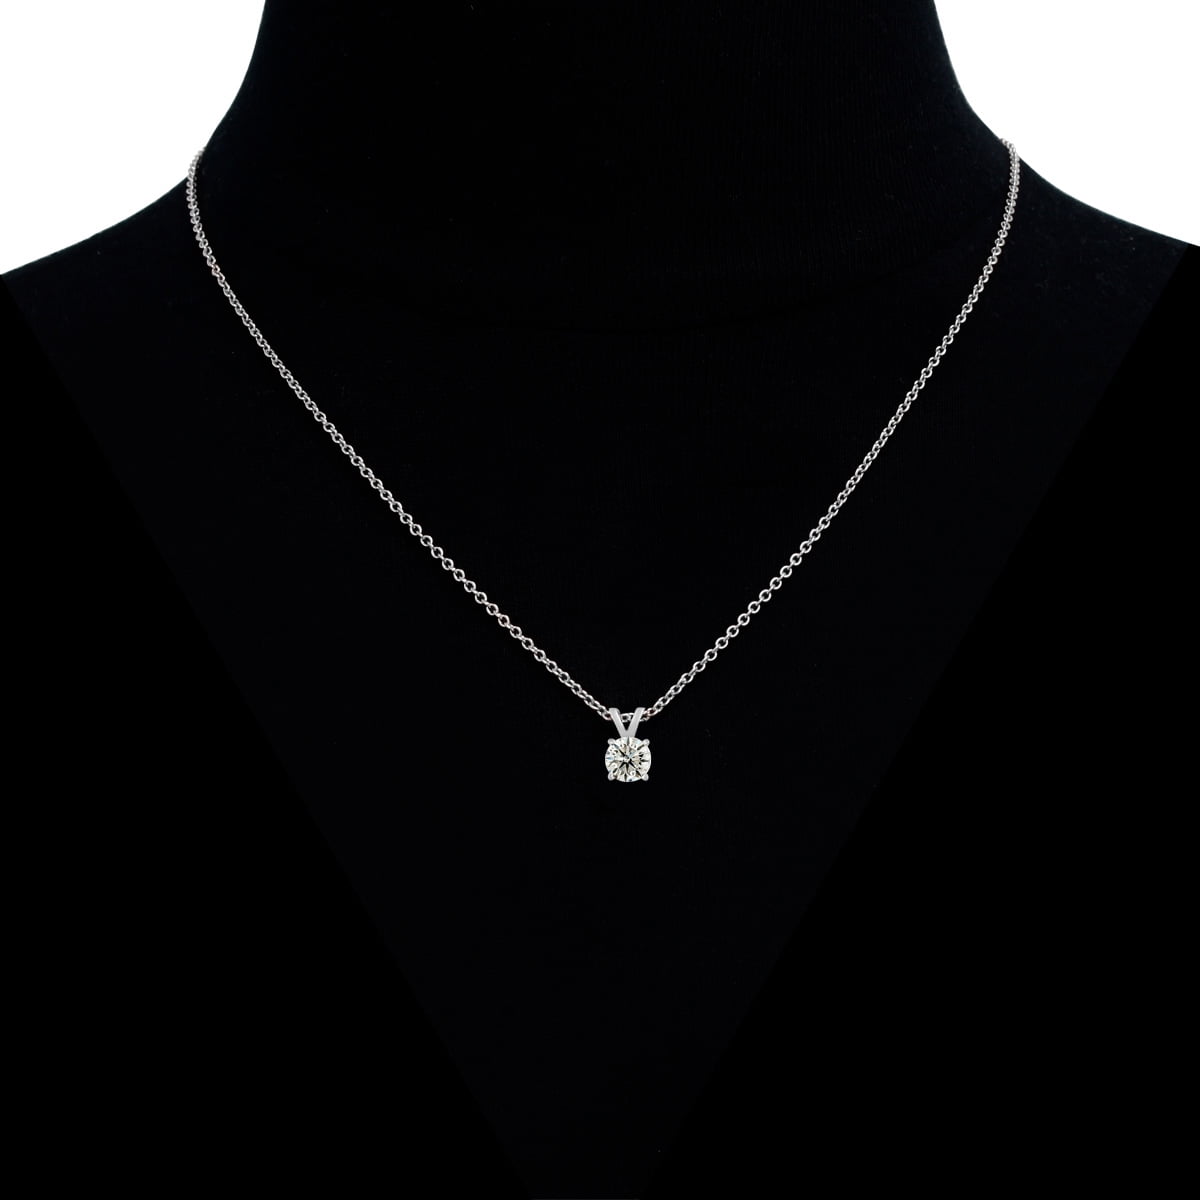 Buy Diamond Pendant Sets Online In India At Best Prices | Tata CLiQ